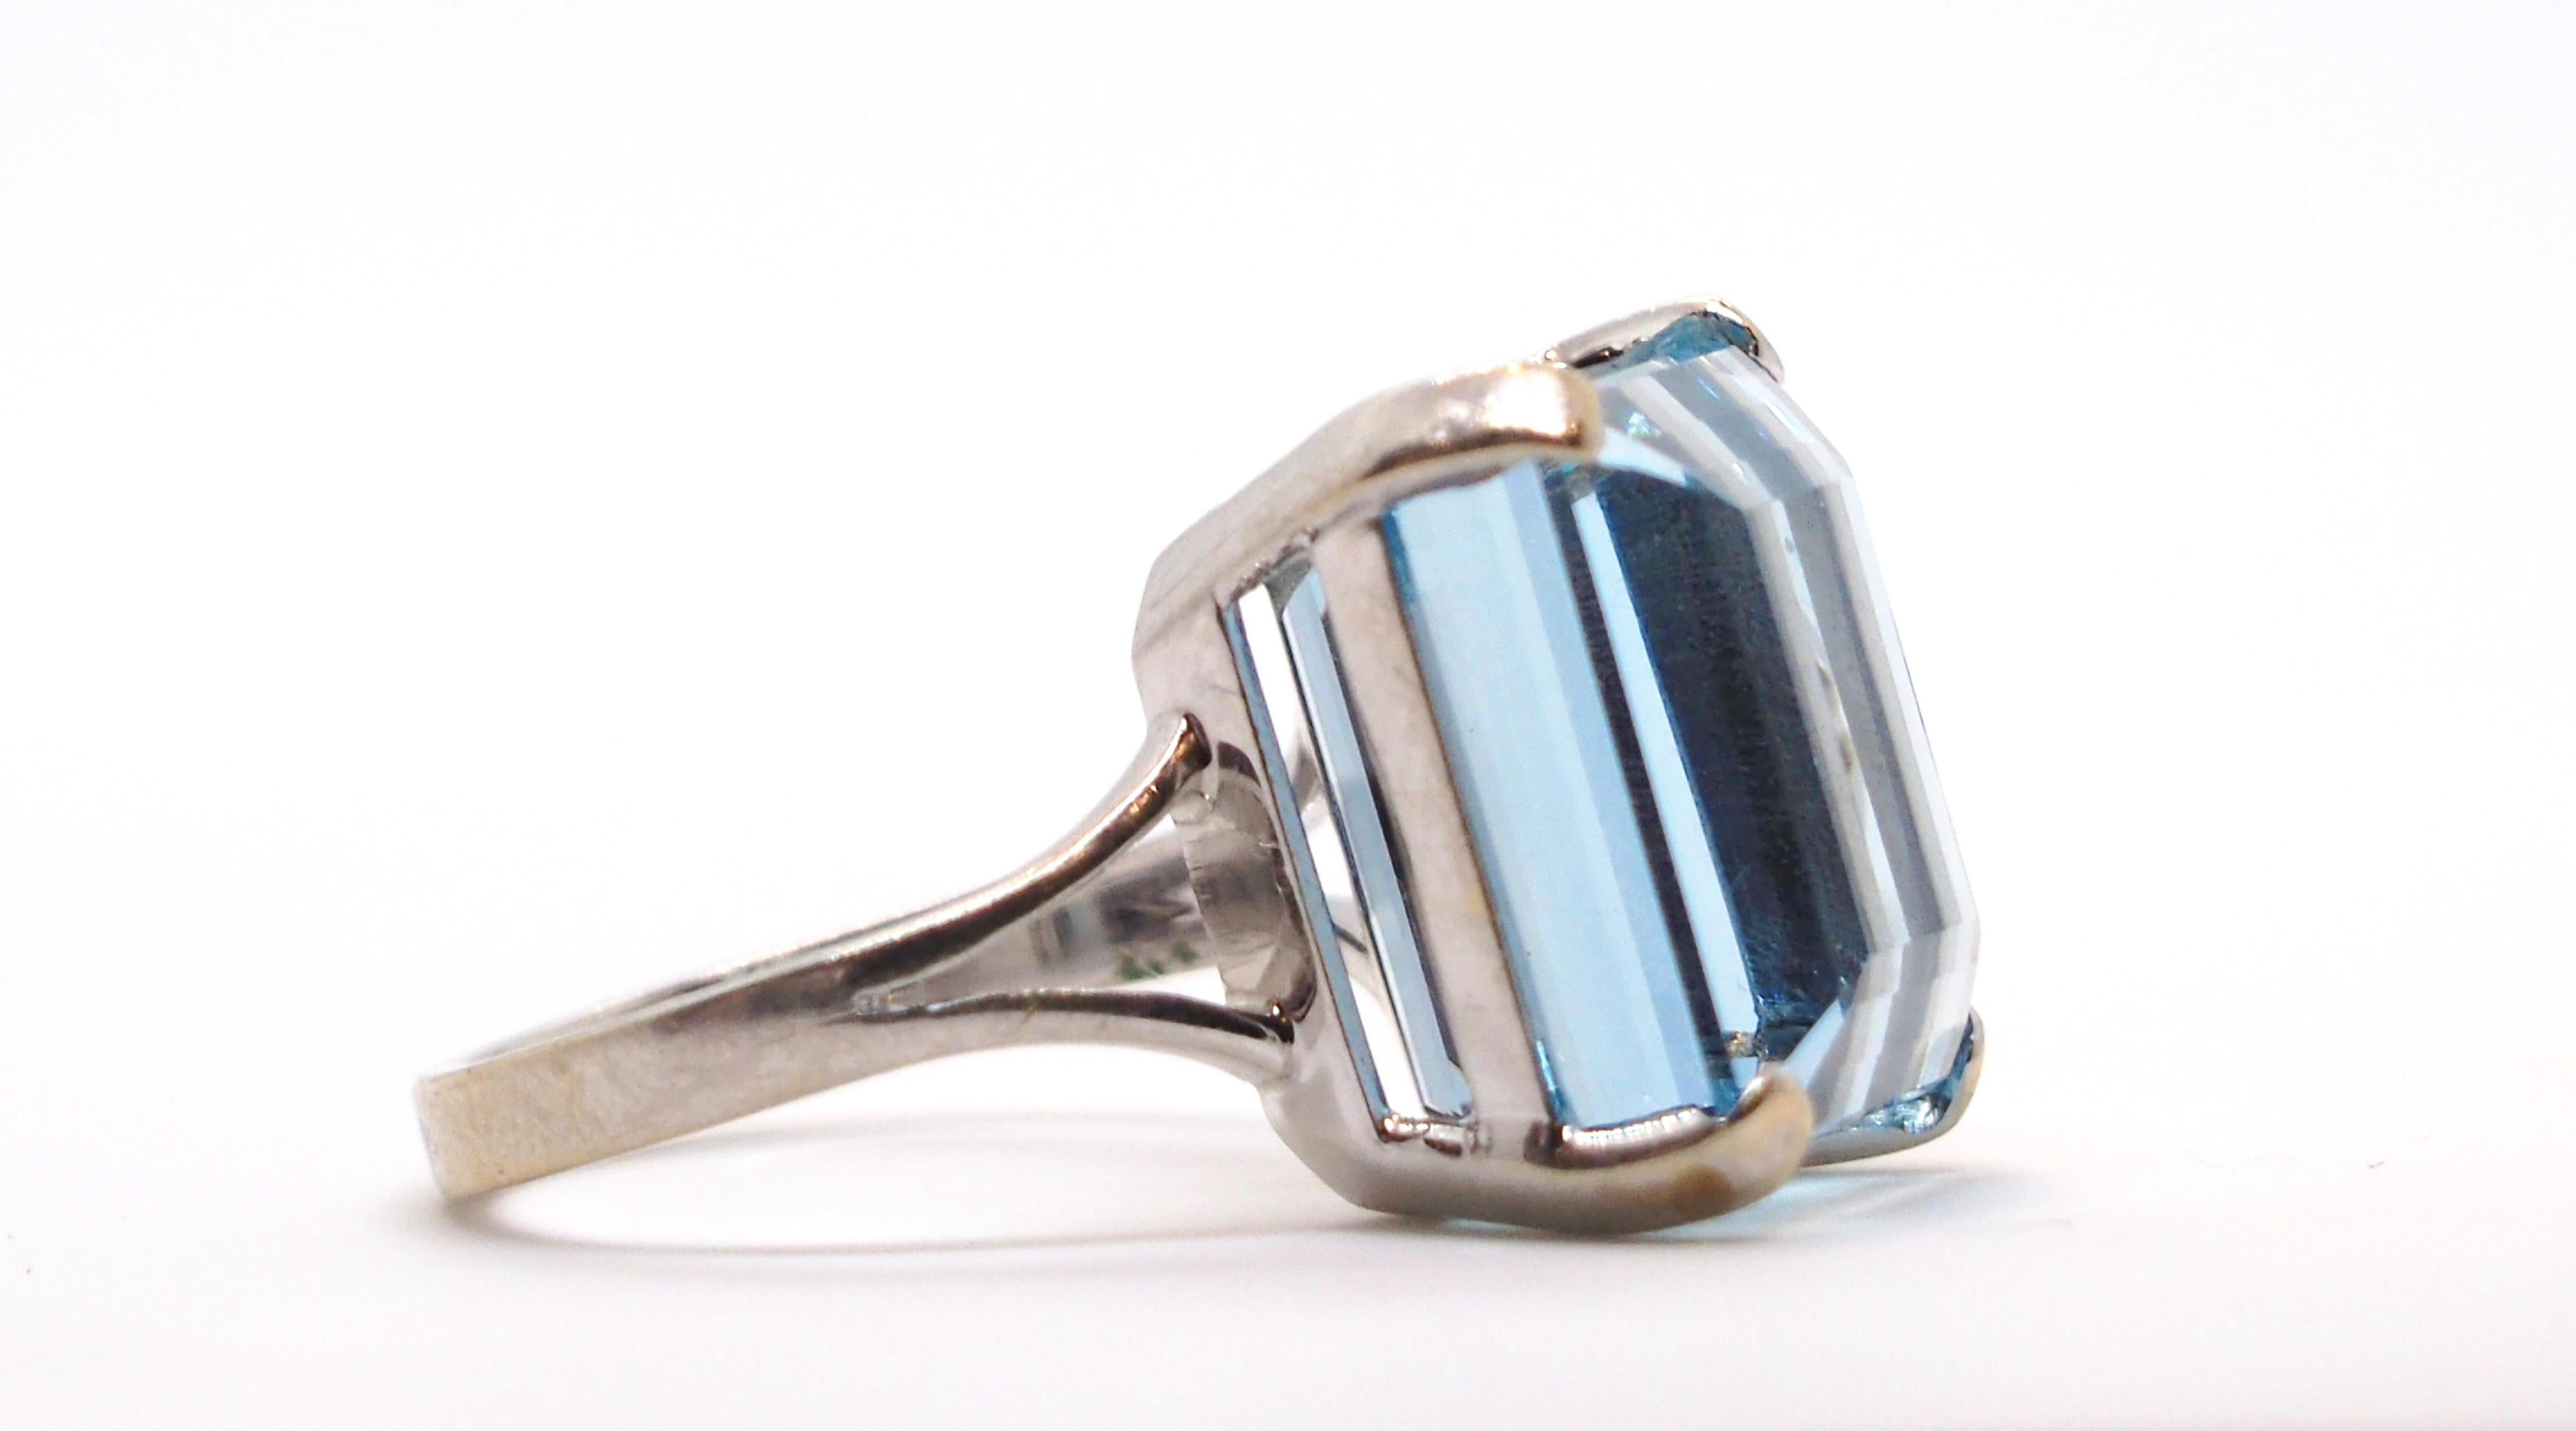 Solitaire Aquamarine 20 Carat Cocktail Ring 18 Karat White Gold In Excellent Condition For Sale In Geneva, CH